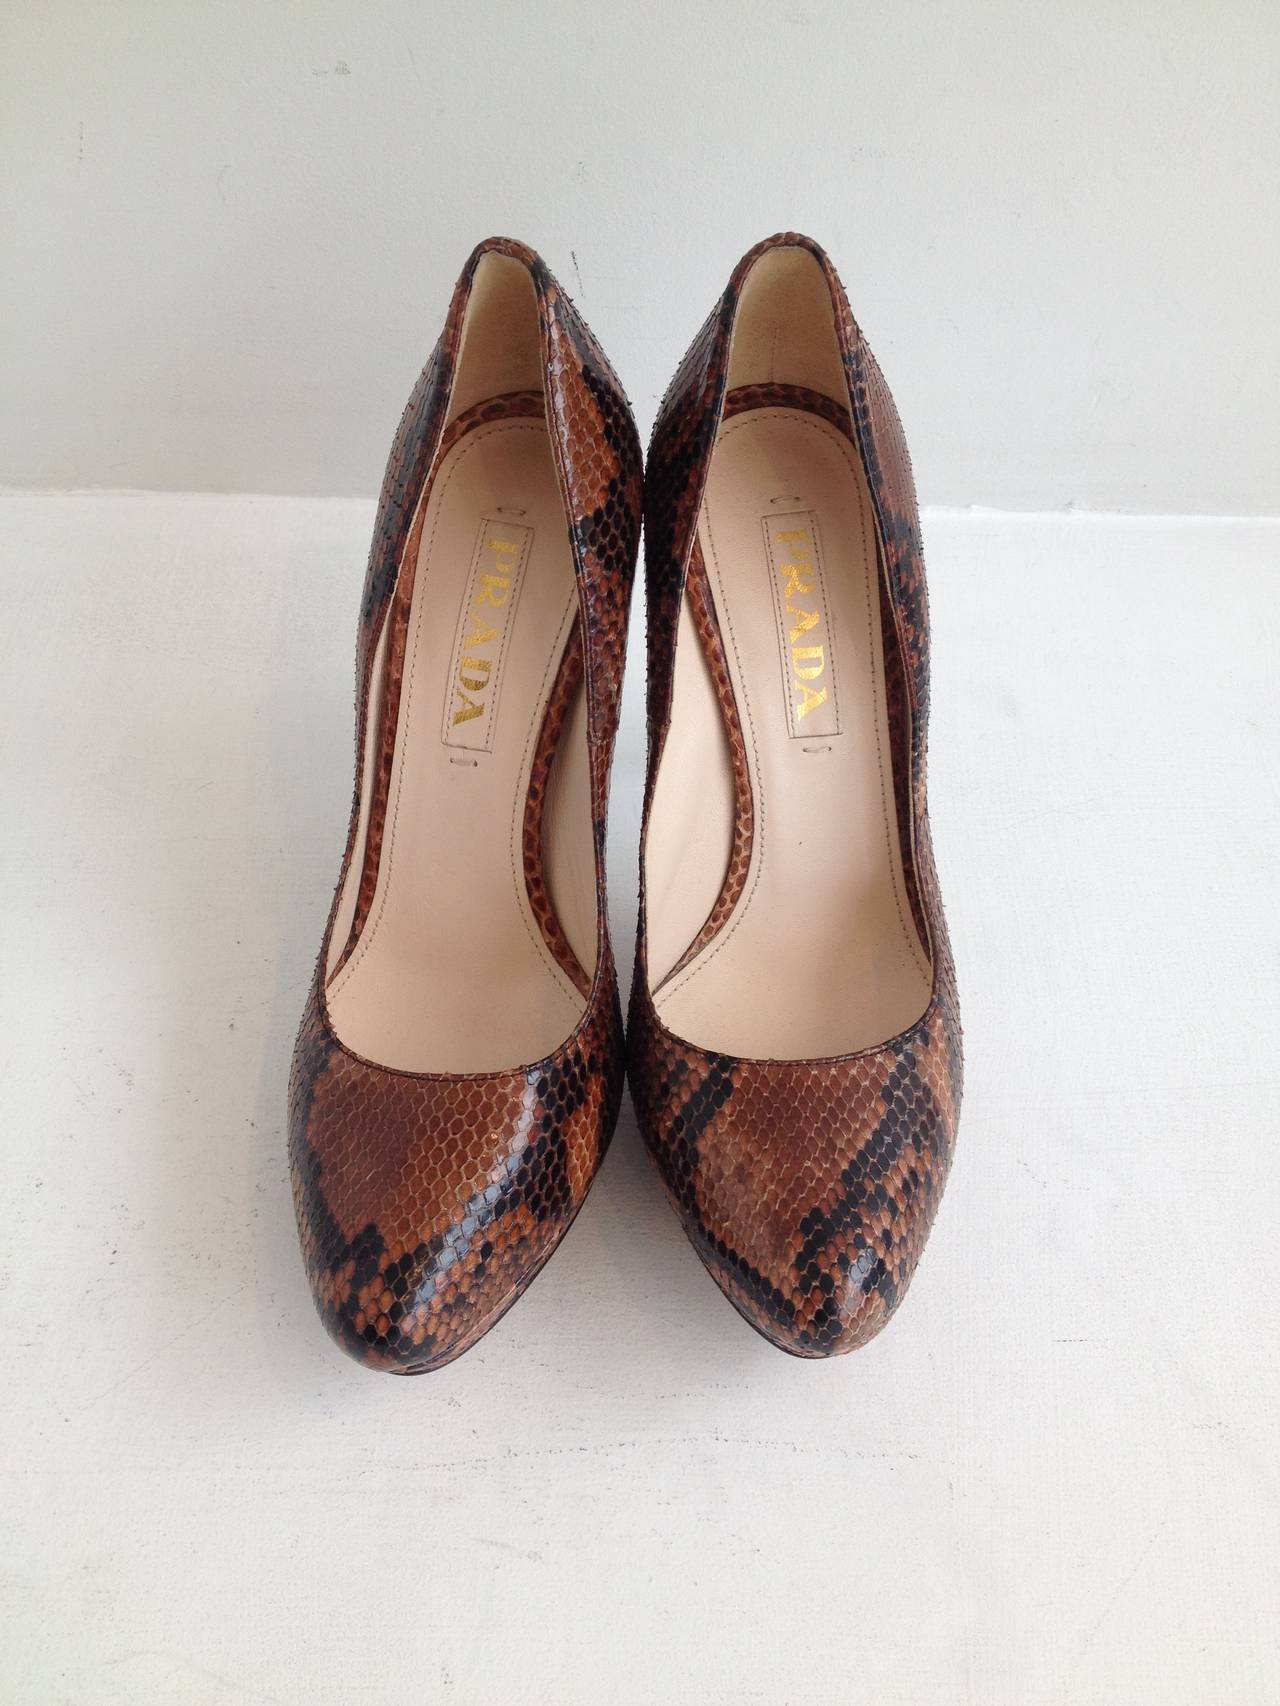 Fabulous! These Prada faux python heels are incredible. The subtle warm brown tone means that they can function as a neutral, while the glossy scales and the variation in tone between black and tan dresses them up and adds a polished and interesting